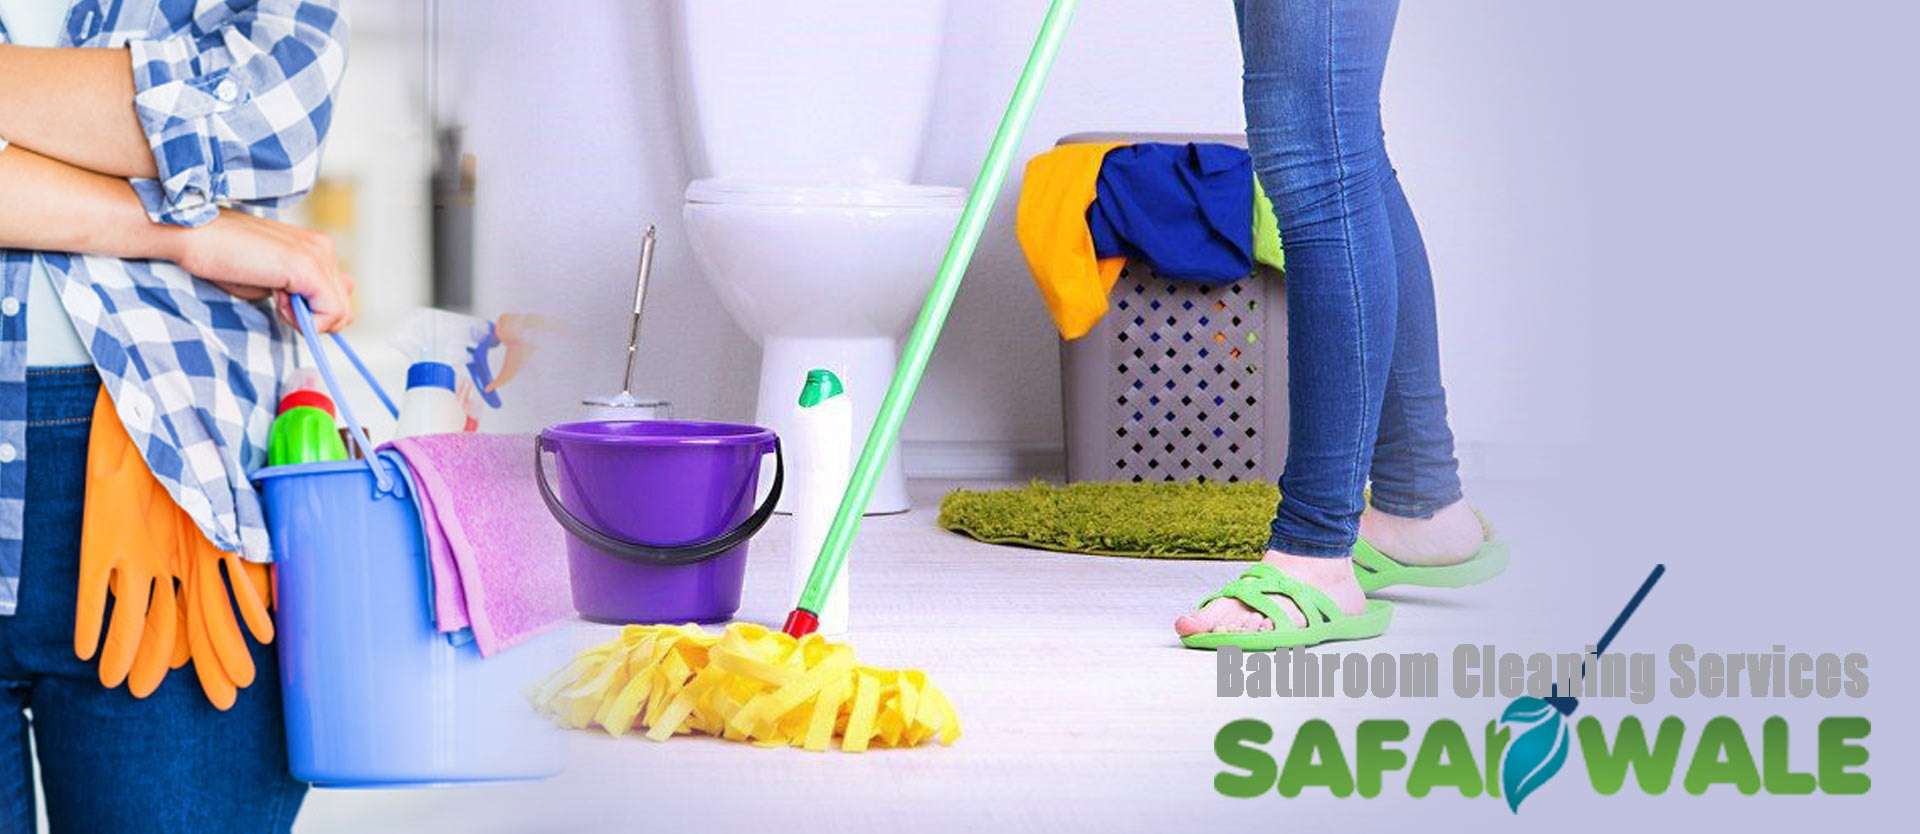 Bathroom Cleaning Services In Sector 67 Noida